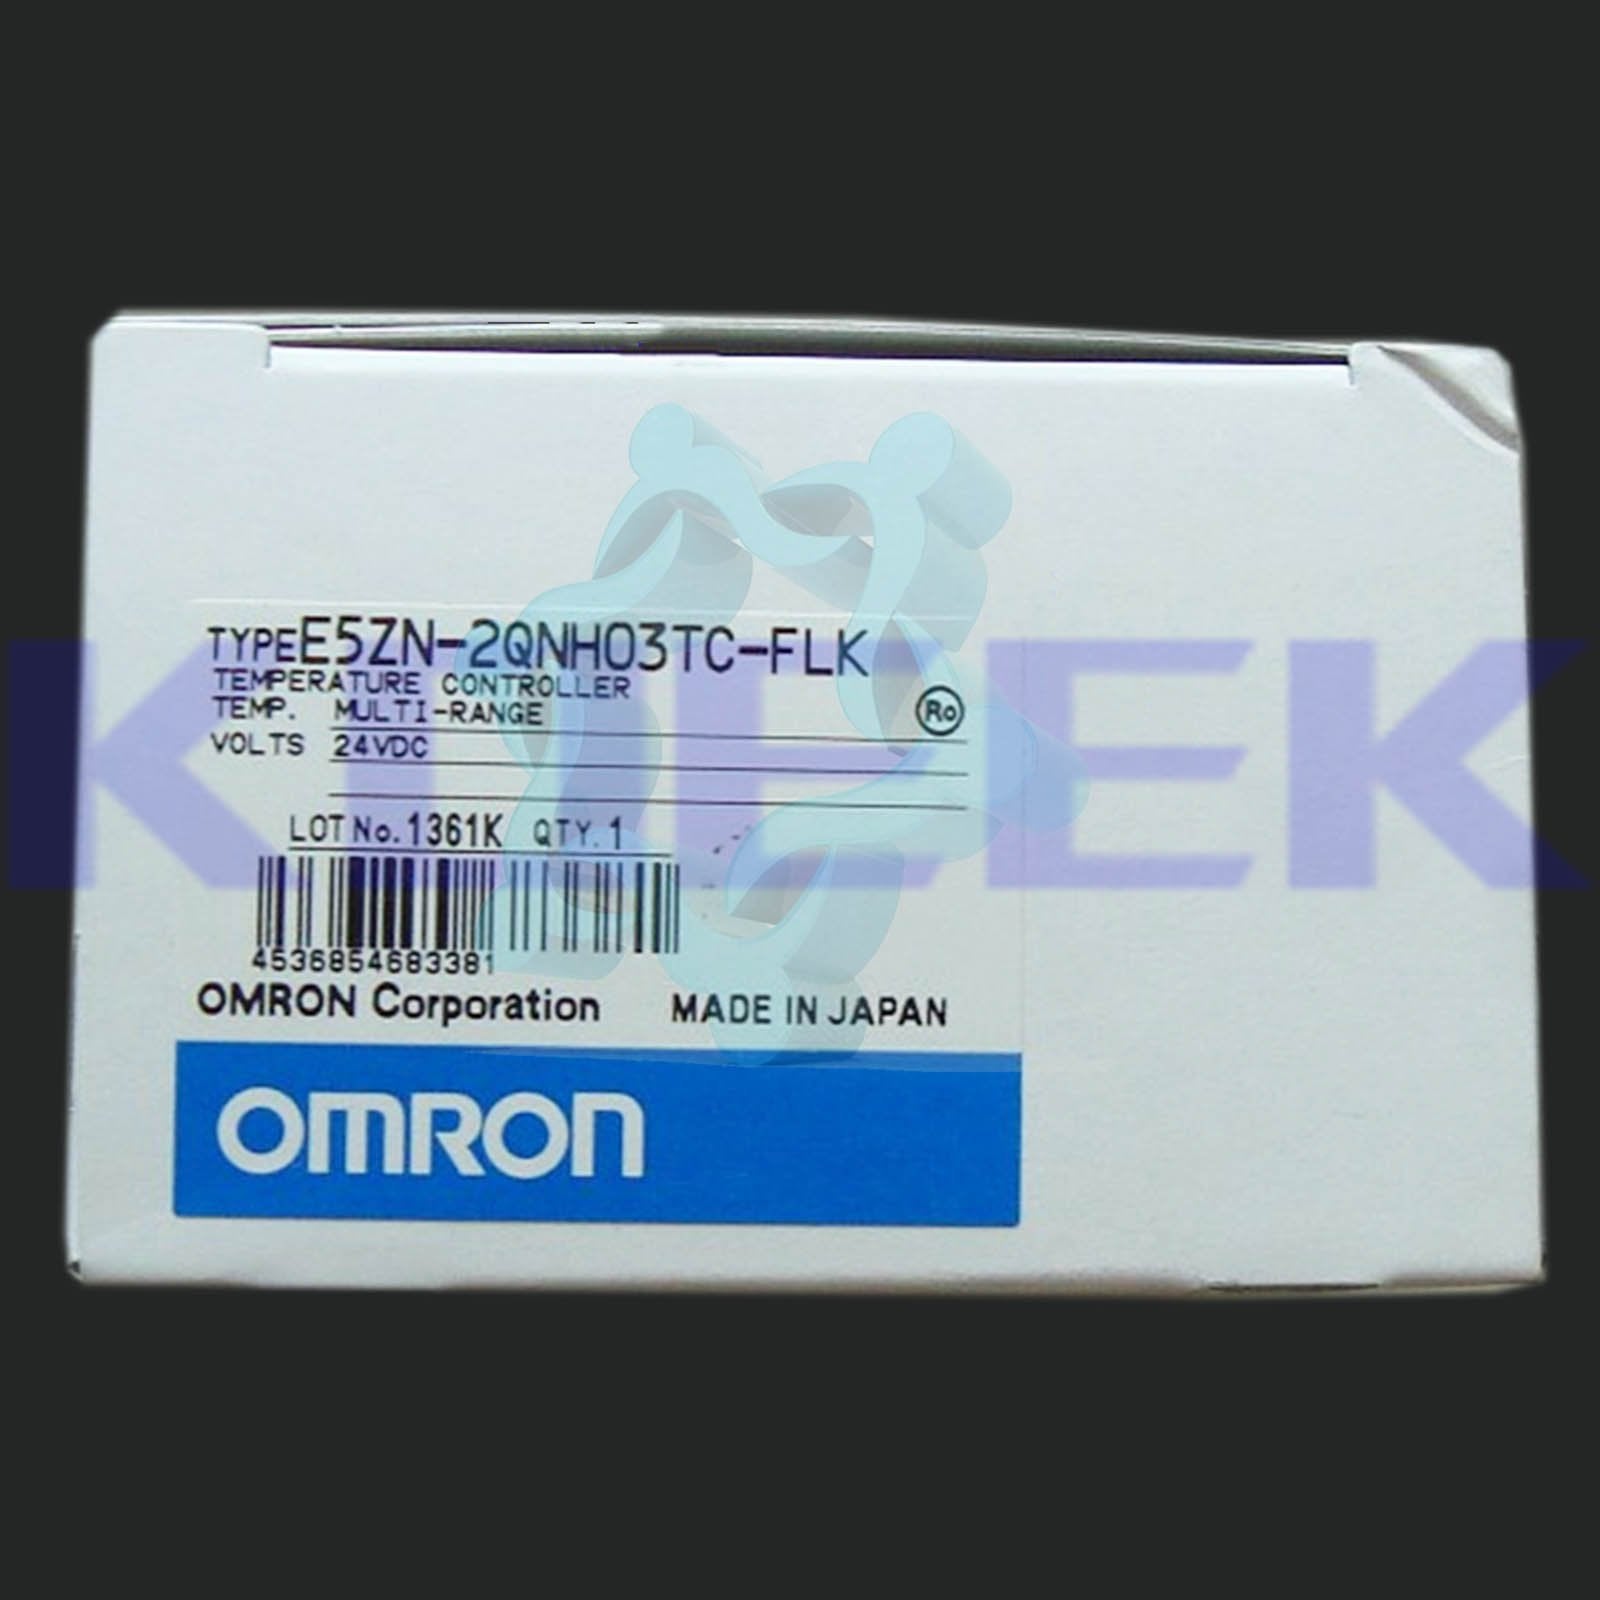 E5ZN-2QNH03TC-FLK KOEED 201-500, 90%, import_2020_10_10_031751, Omron, Other